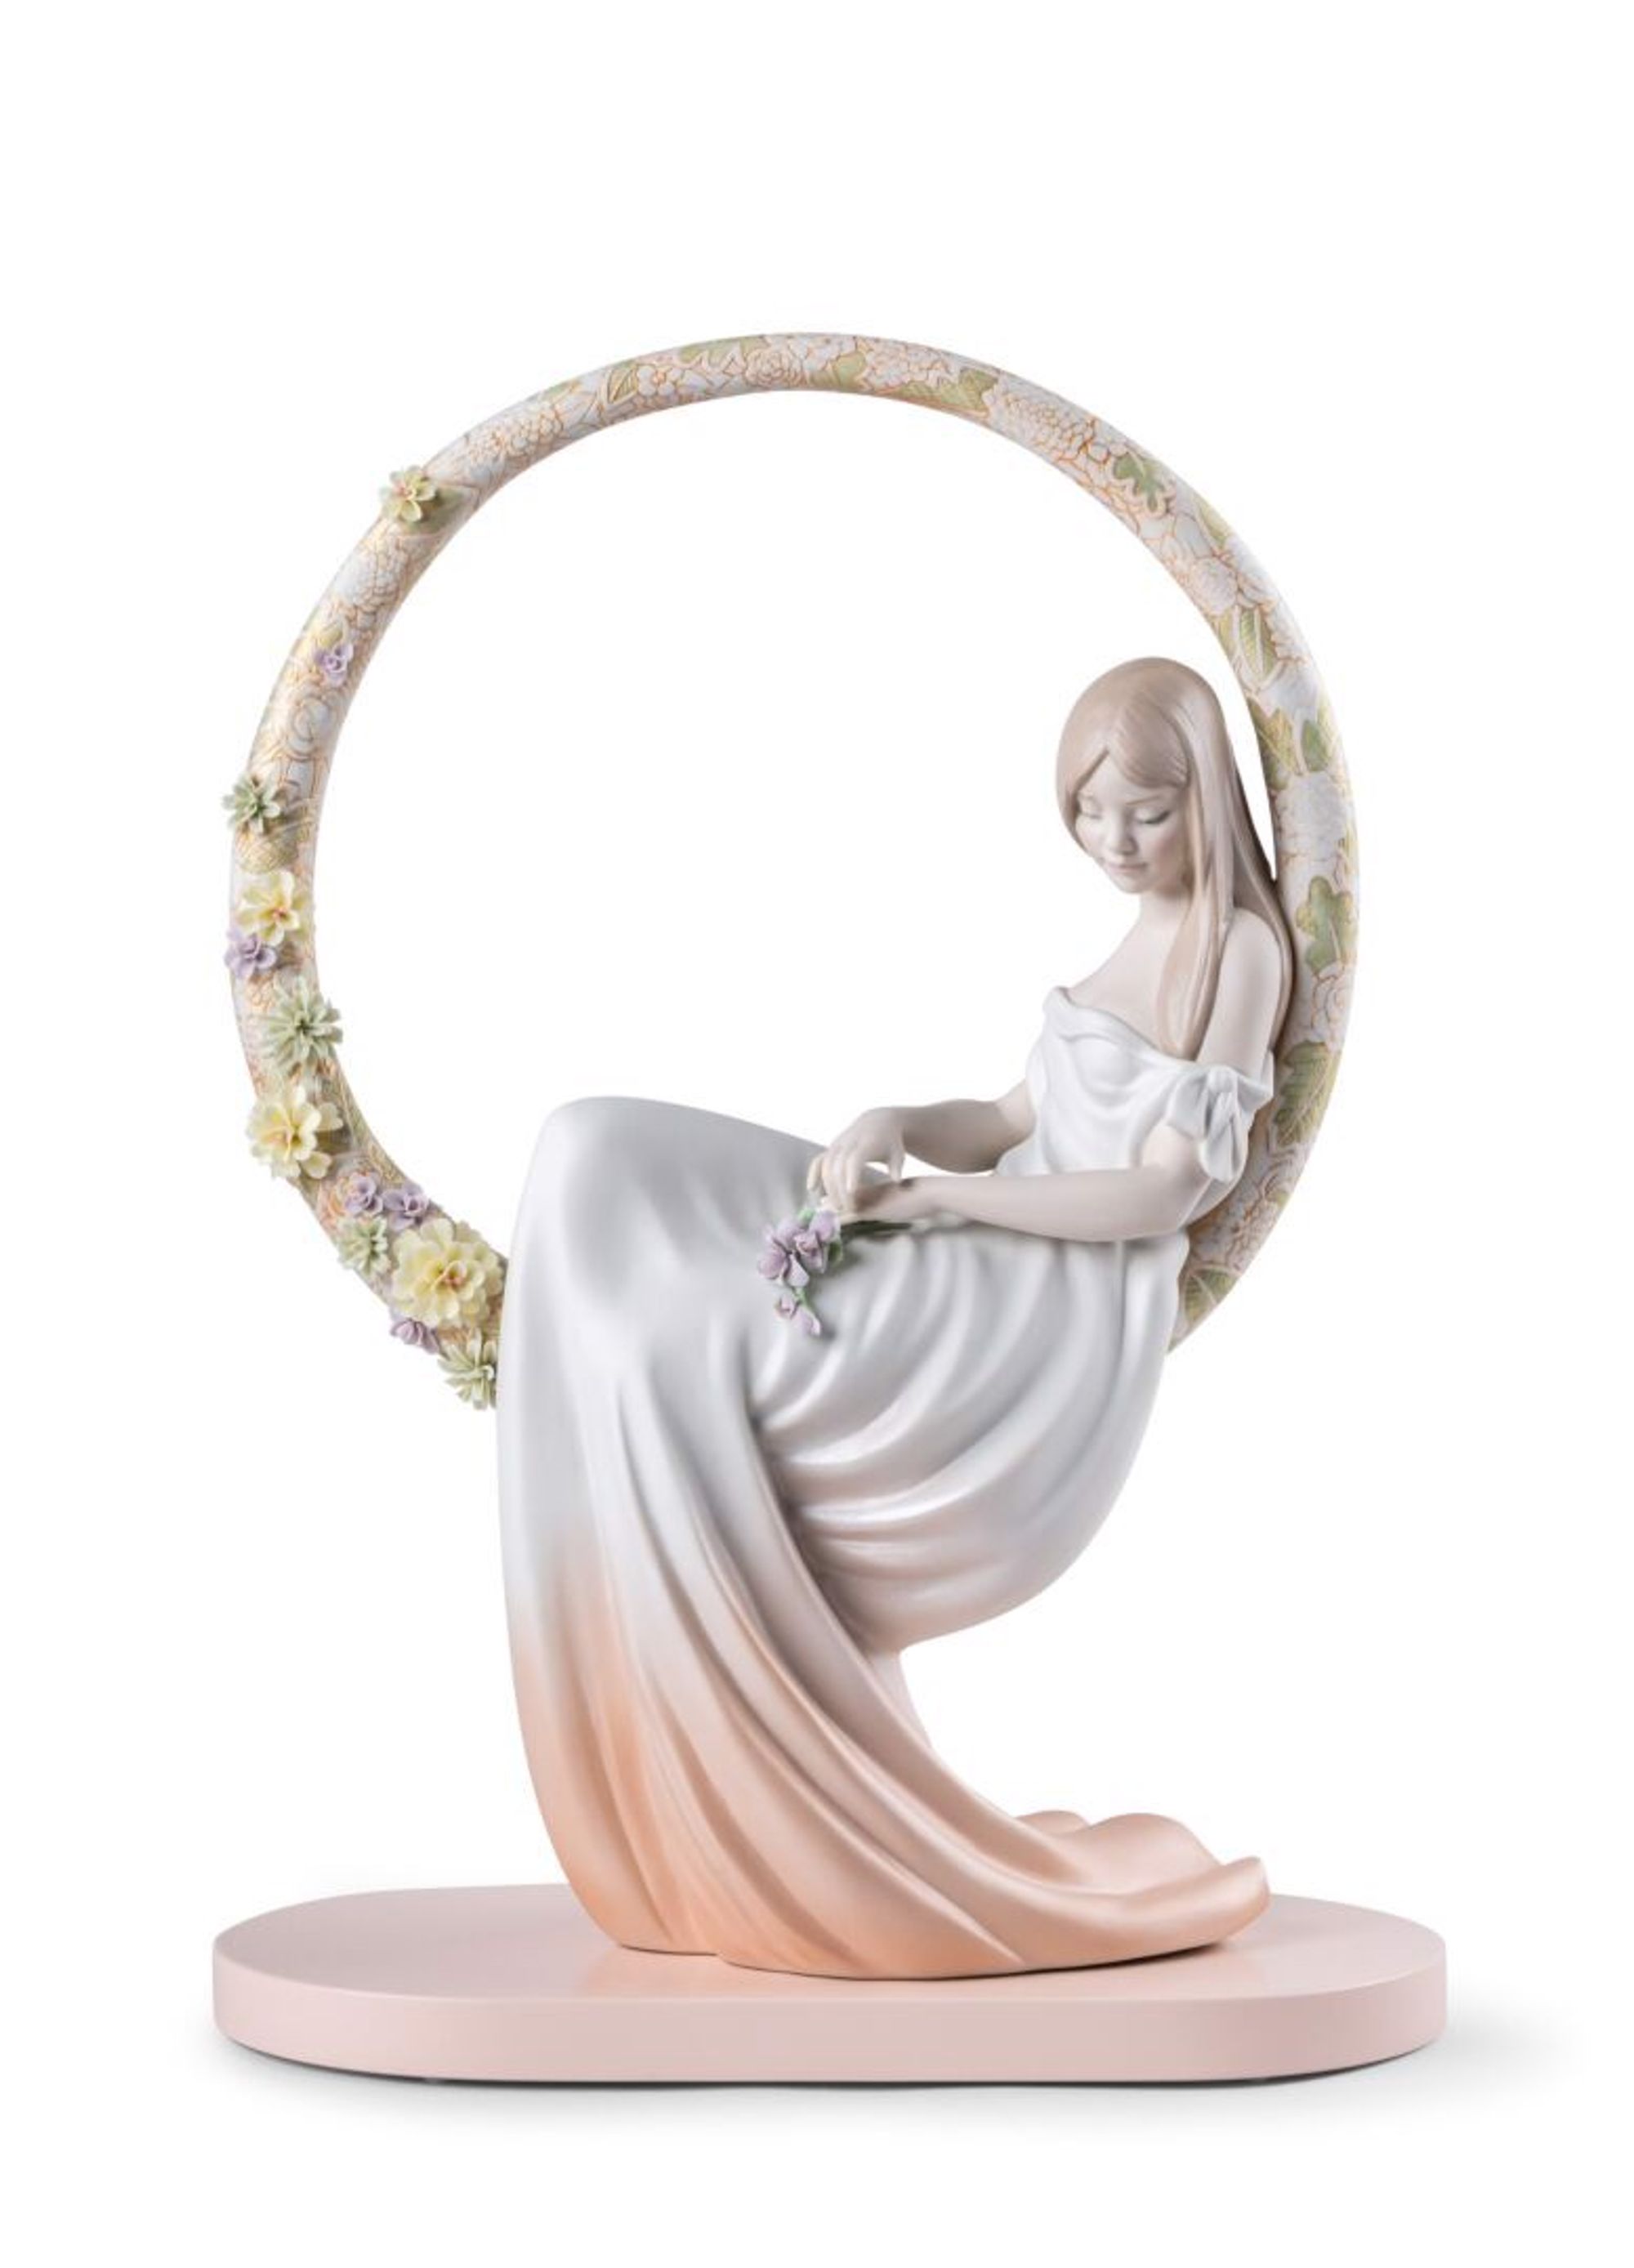 Lladro's In Her Thoughts figurine. Image courtesy: Qhome